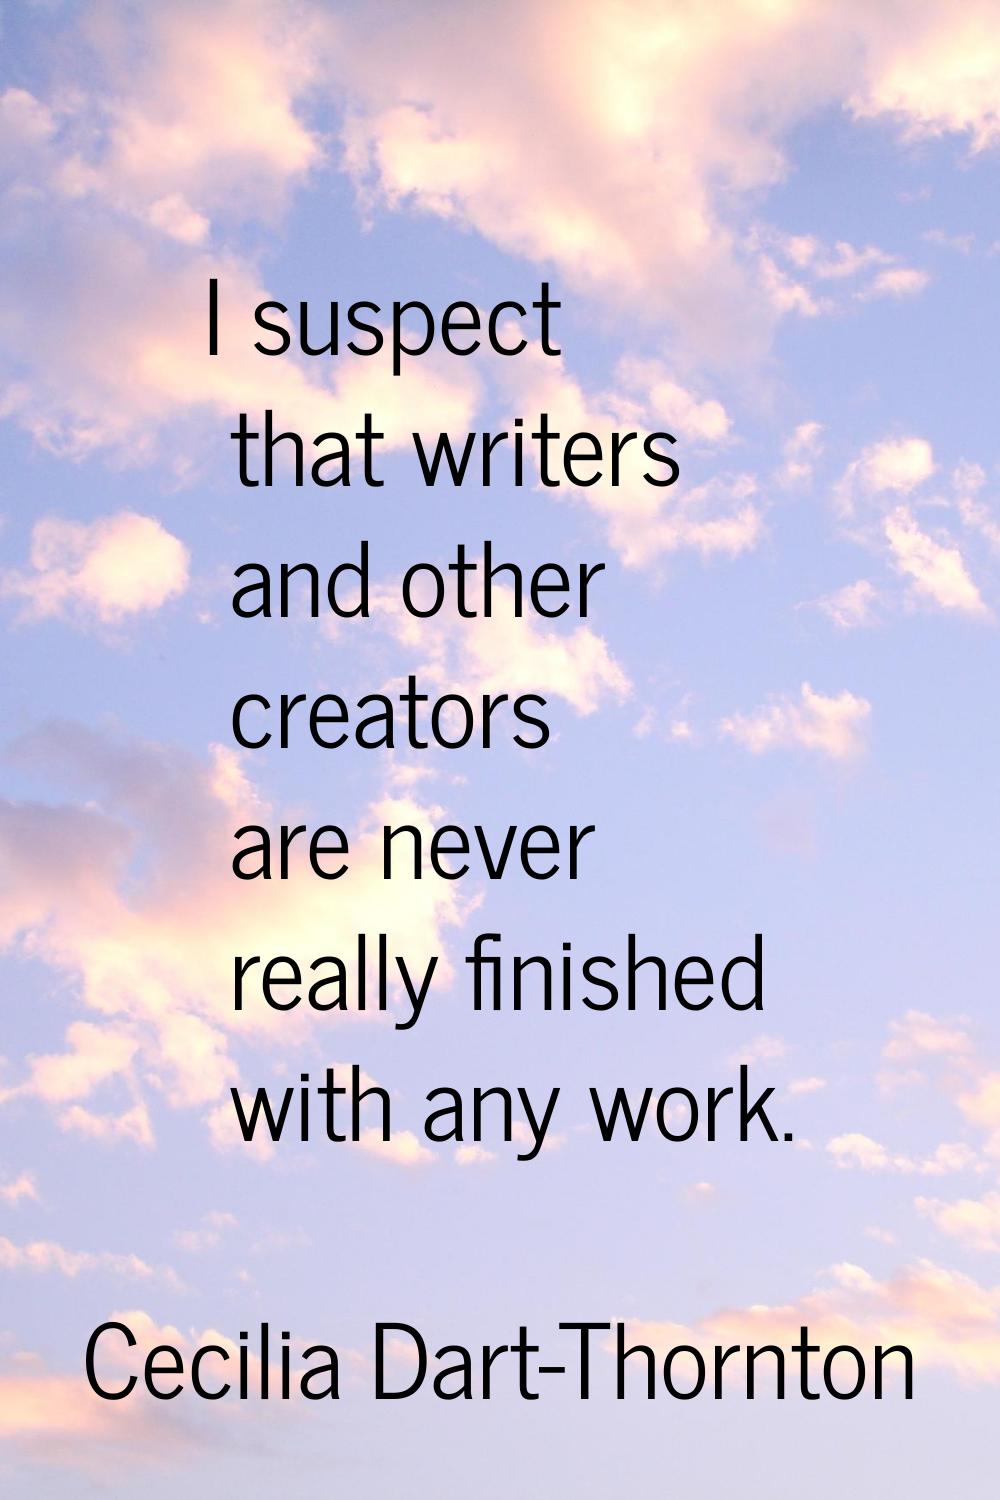 I suspect that writers and other creators are never really finished with any work.